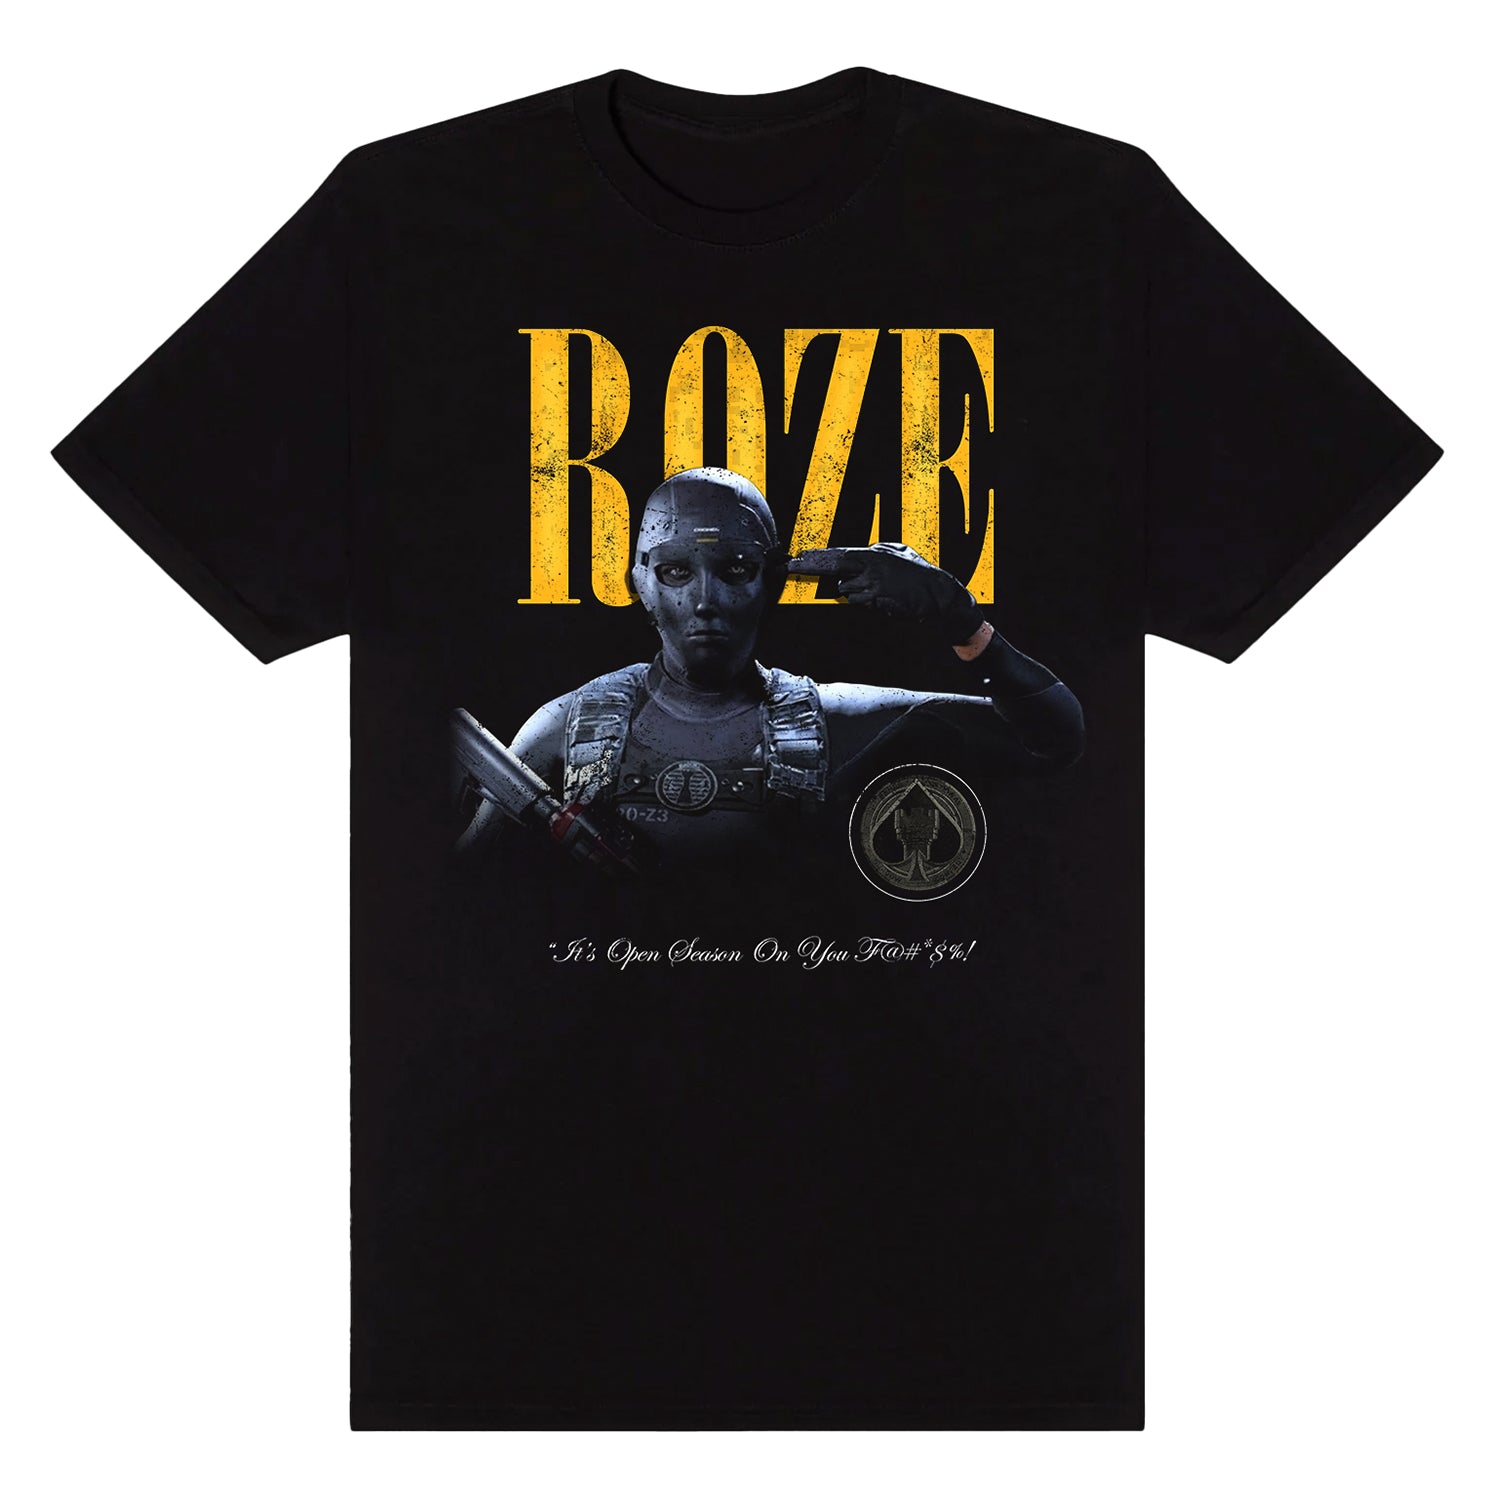 Call of Duty Young & Reckless Roze Black T-Shirt - Front View with Roze Design and Logo